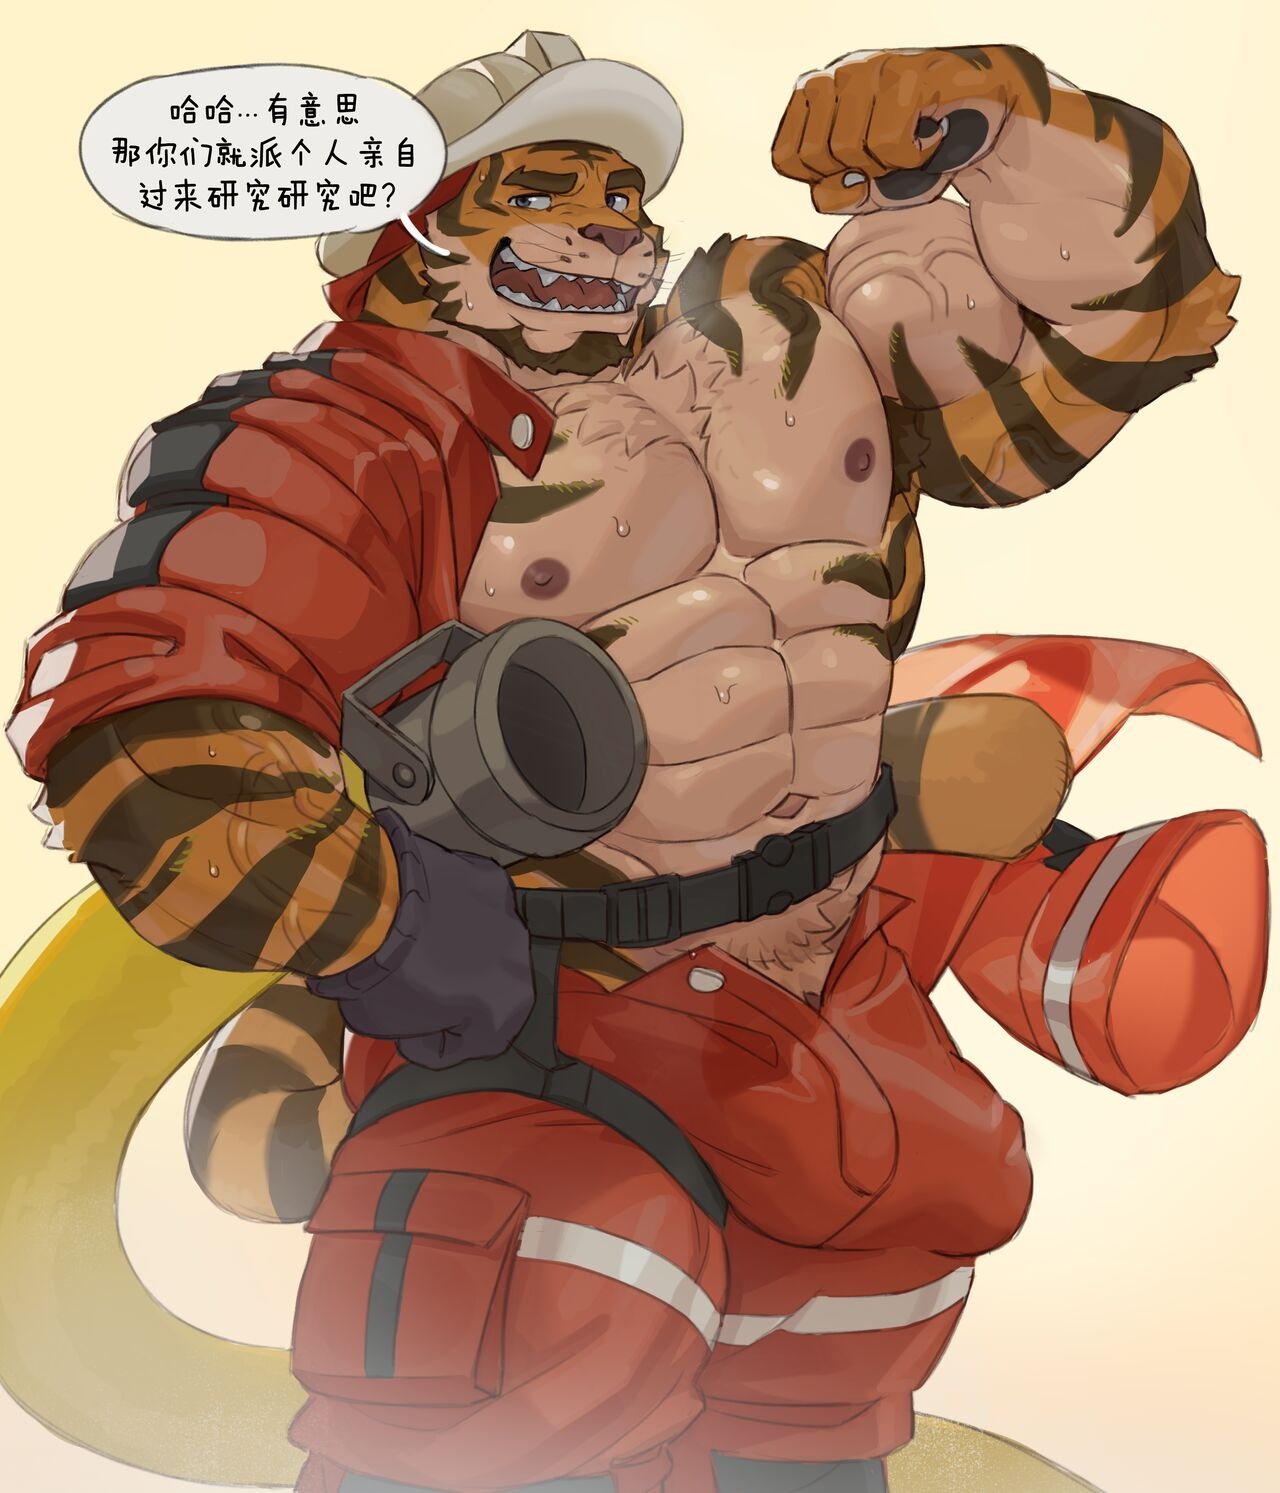 [Imatoart] Tiger Fire Chief's Training Session | 老虎消防队长的训练时间! [Chinese][Translated by Chrome Heart Tags] 4